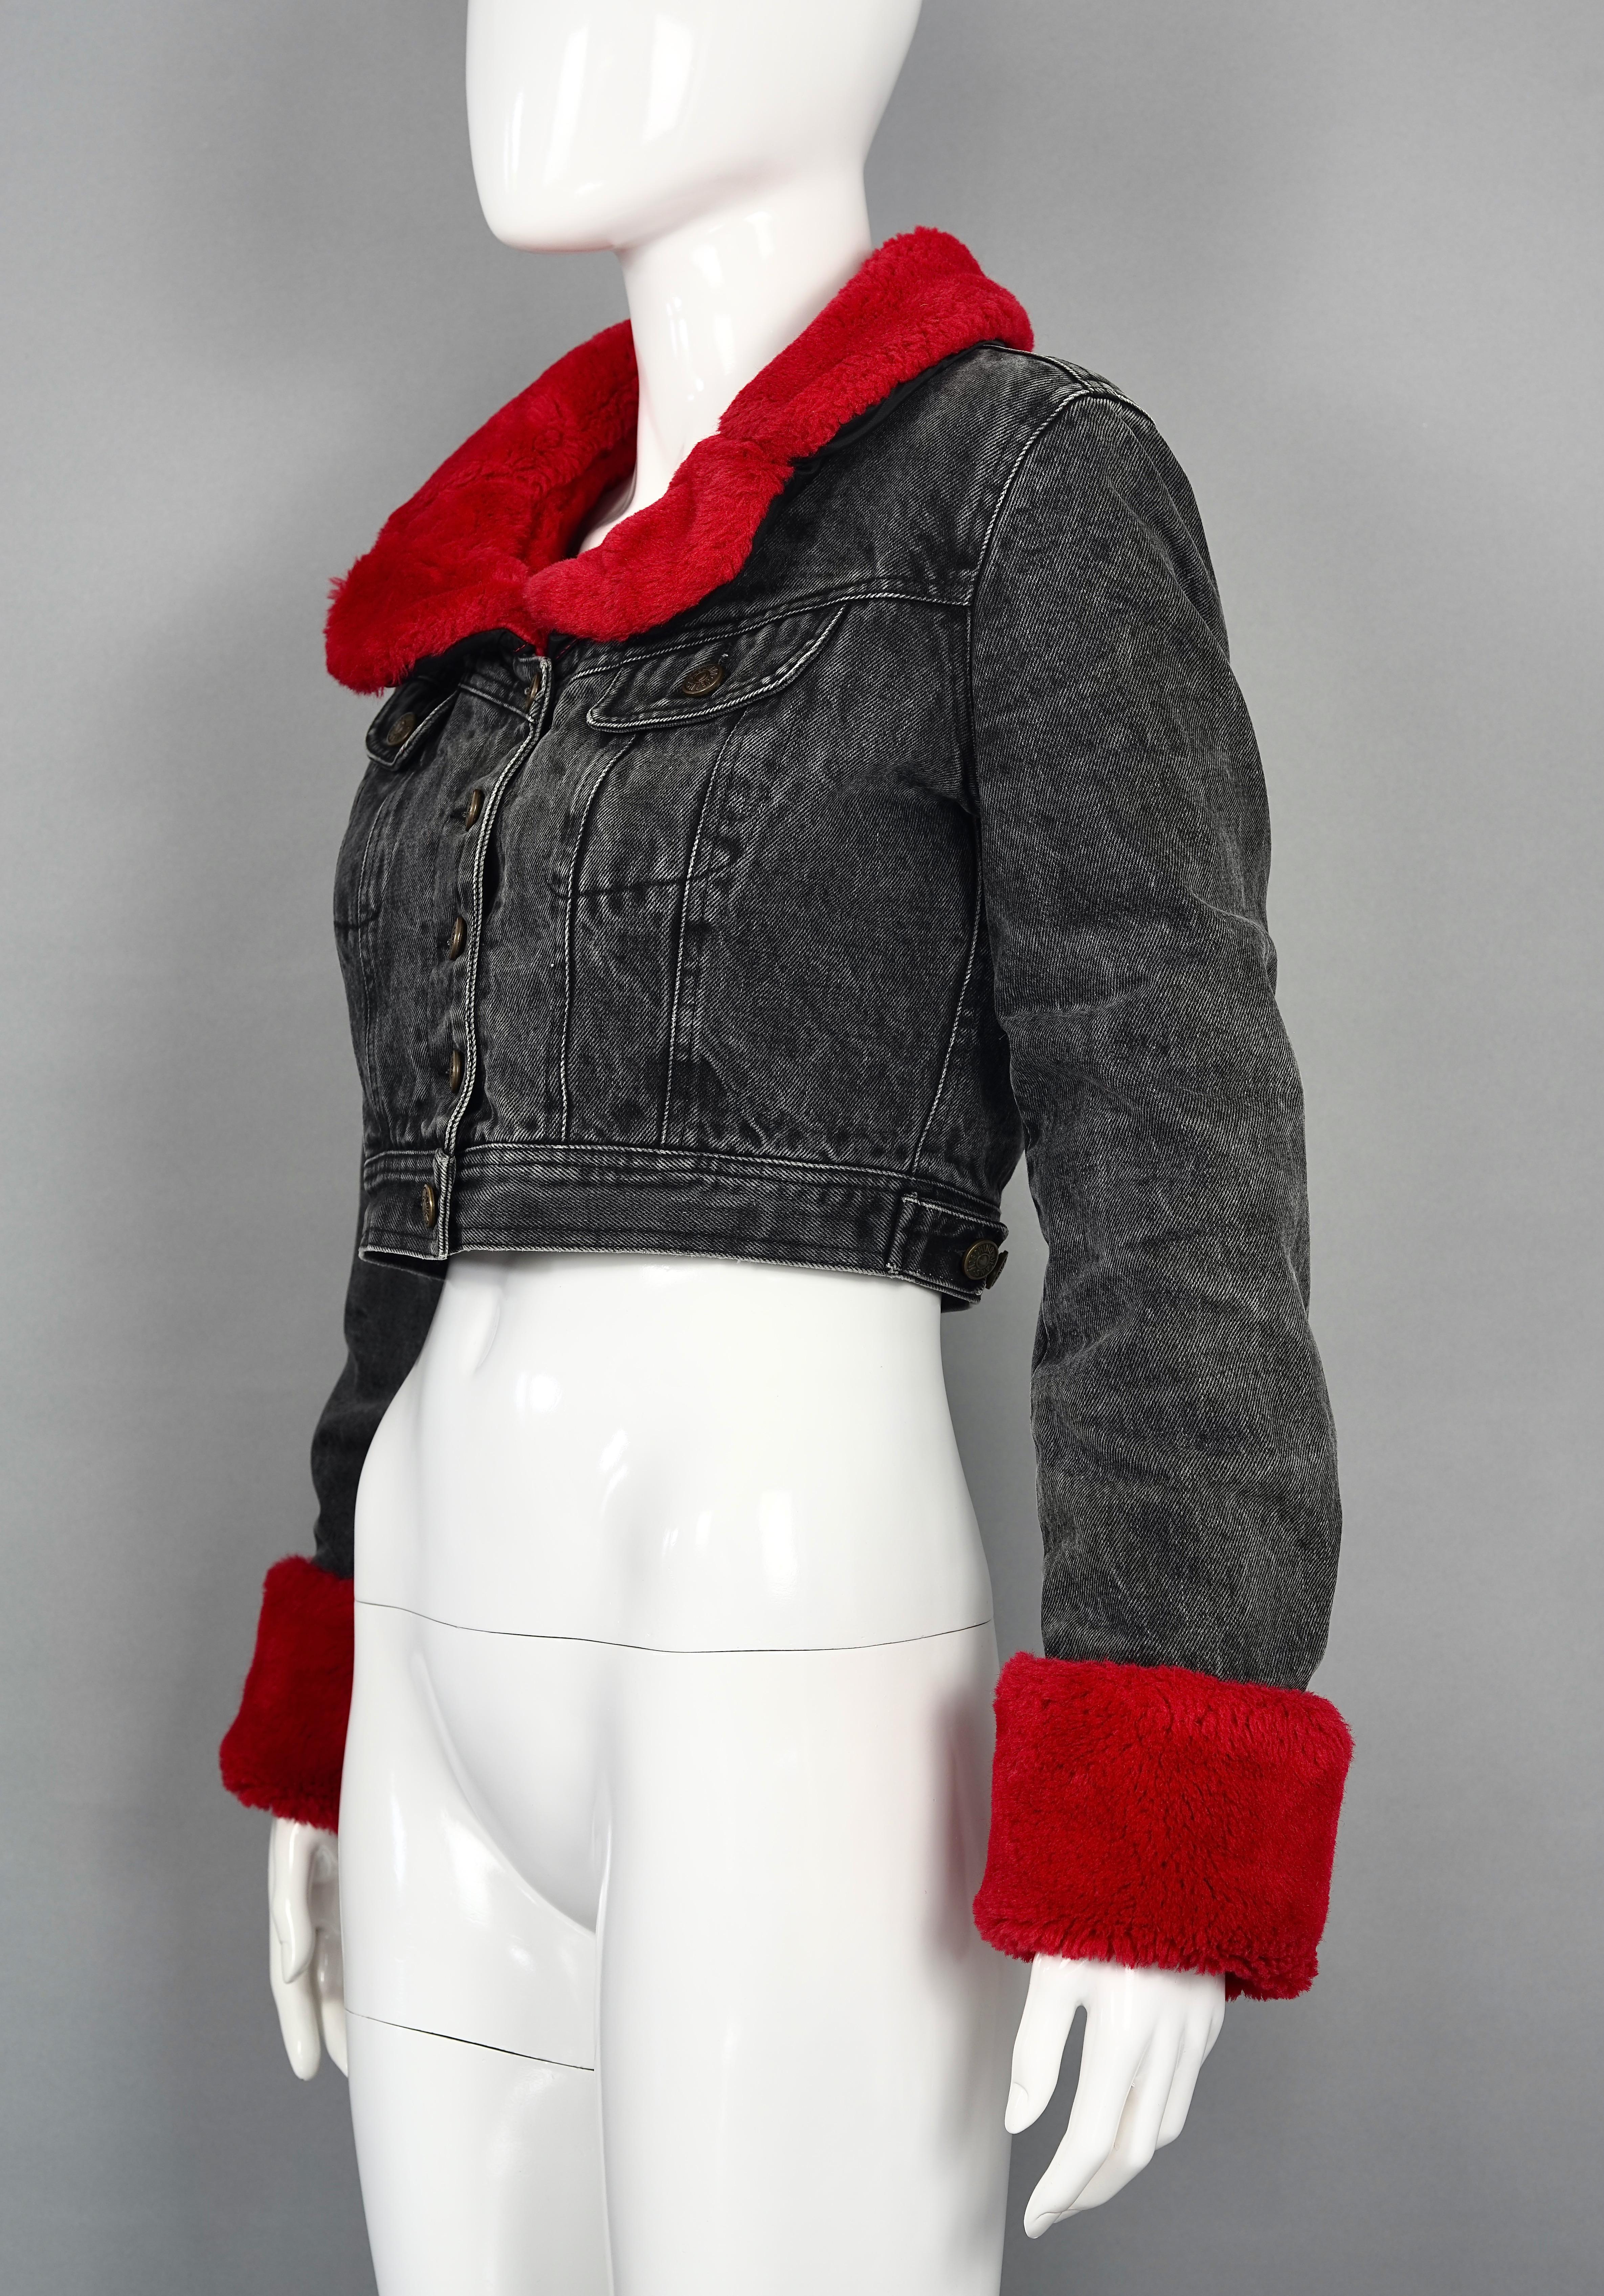 Vintage MOSCHINO Removable Red Faux Fur Denim Cropped Jacket

Measurements taken laid flat, please double bust and waist:
Shoulder: 17.71 inches (45 cm)
Sleeves: 23.62 inches  (60 cm)  
Bust: 18.89 inches  (48 cm)
Waist: 15.75 inches  (40